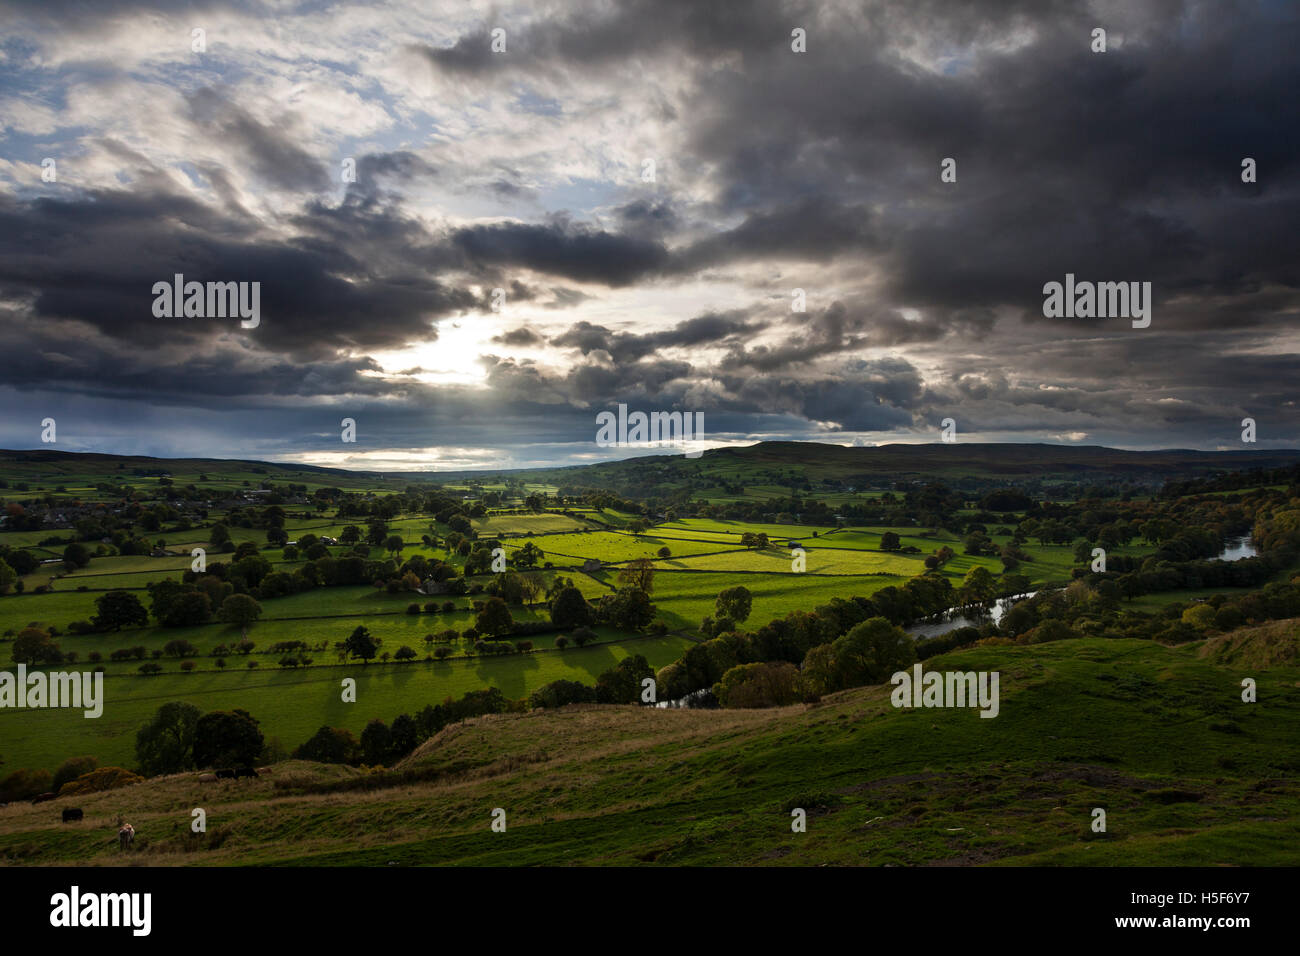 Upper Teesdale, County Durham UK.  Thursday 20th October 2016, UK Weather.  After a day of sunny spells and heavy showers in North East England, some late evening light illuminates the banks of the River Tees near Middleton-in-Teesdale.  Credit:  David Forster/Alamy Live News Stock Photo